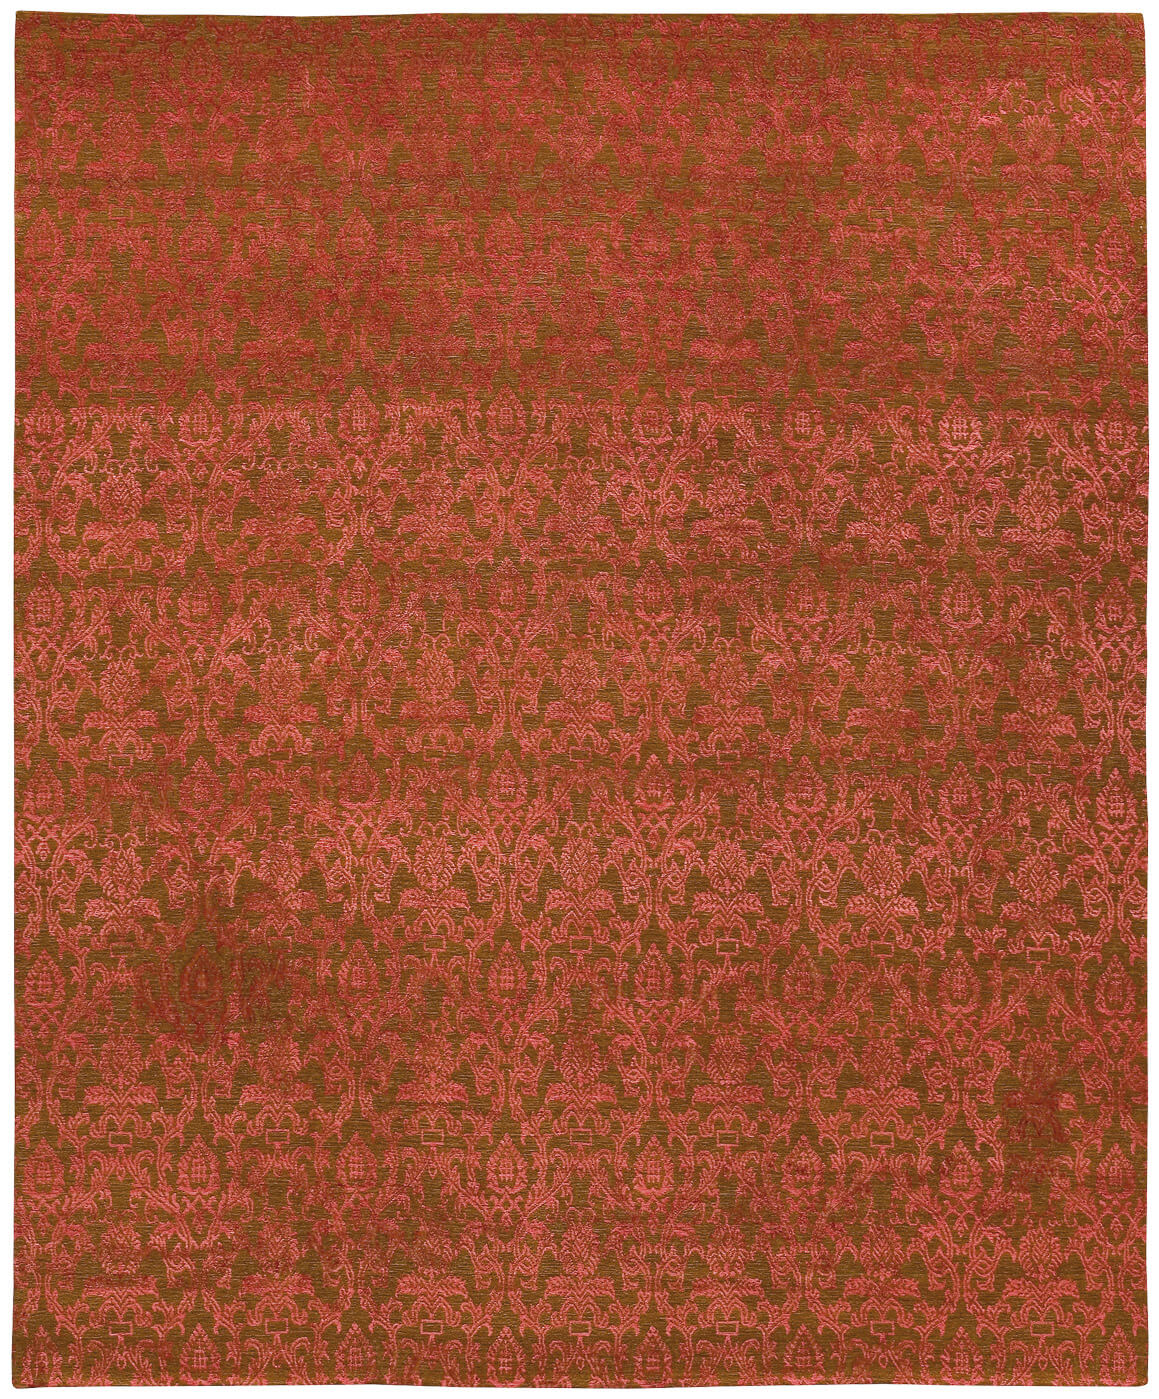 Roma Red Luxury Hand-woven Rug ☞ Size: 300 x 400 cm